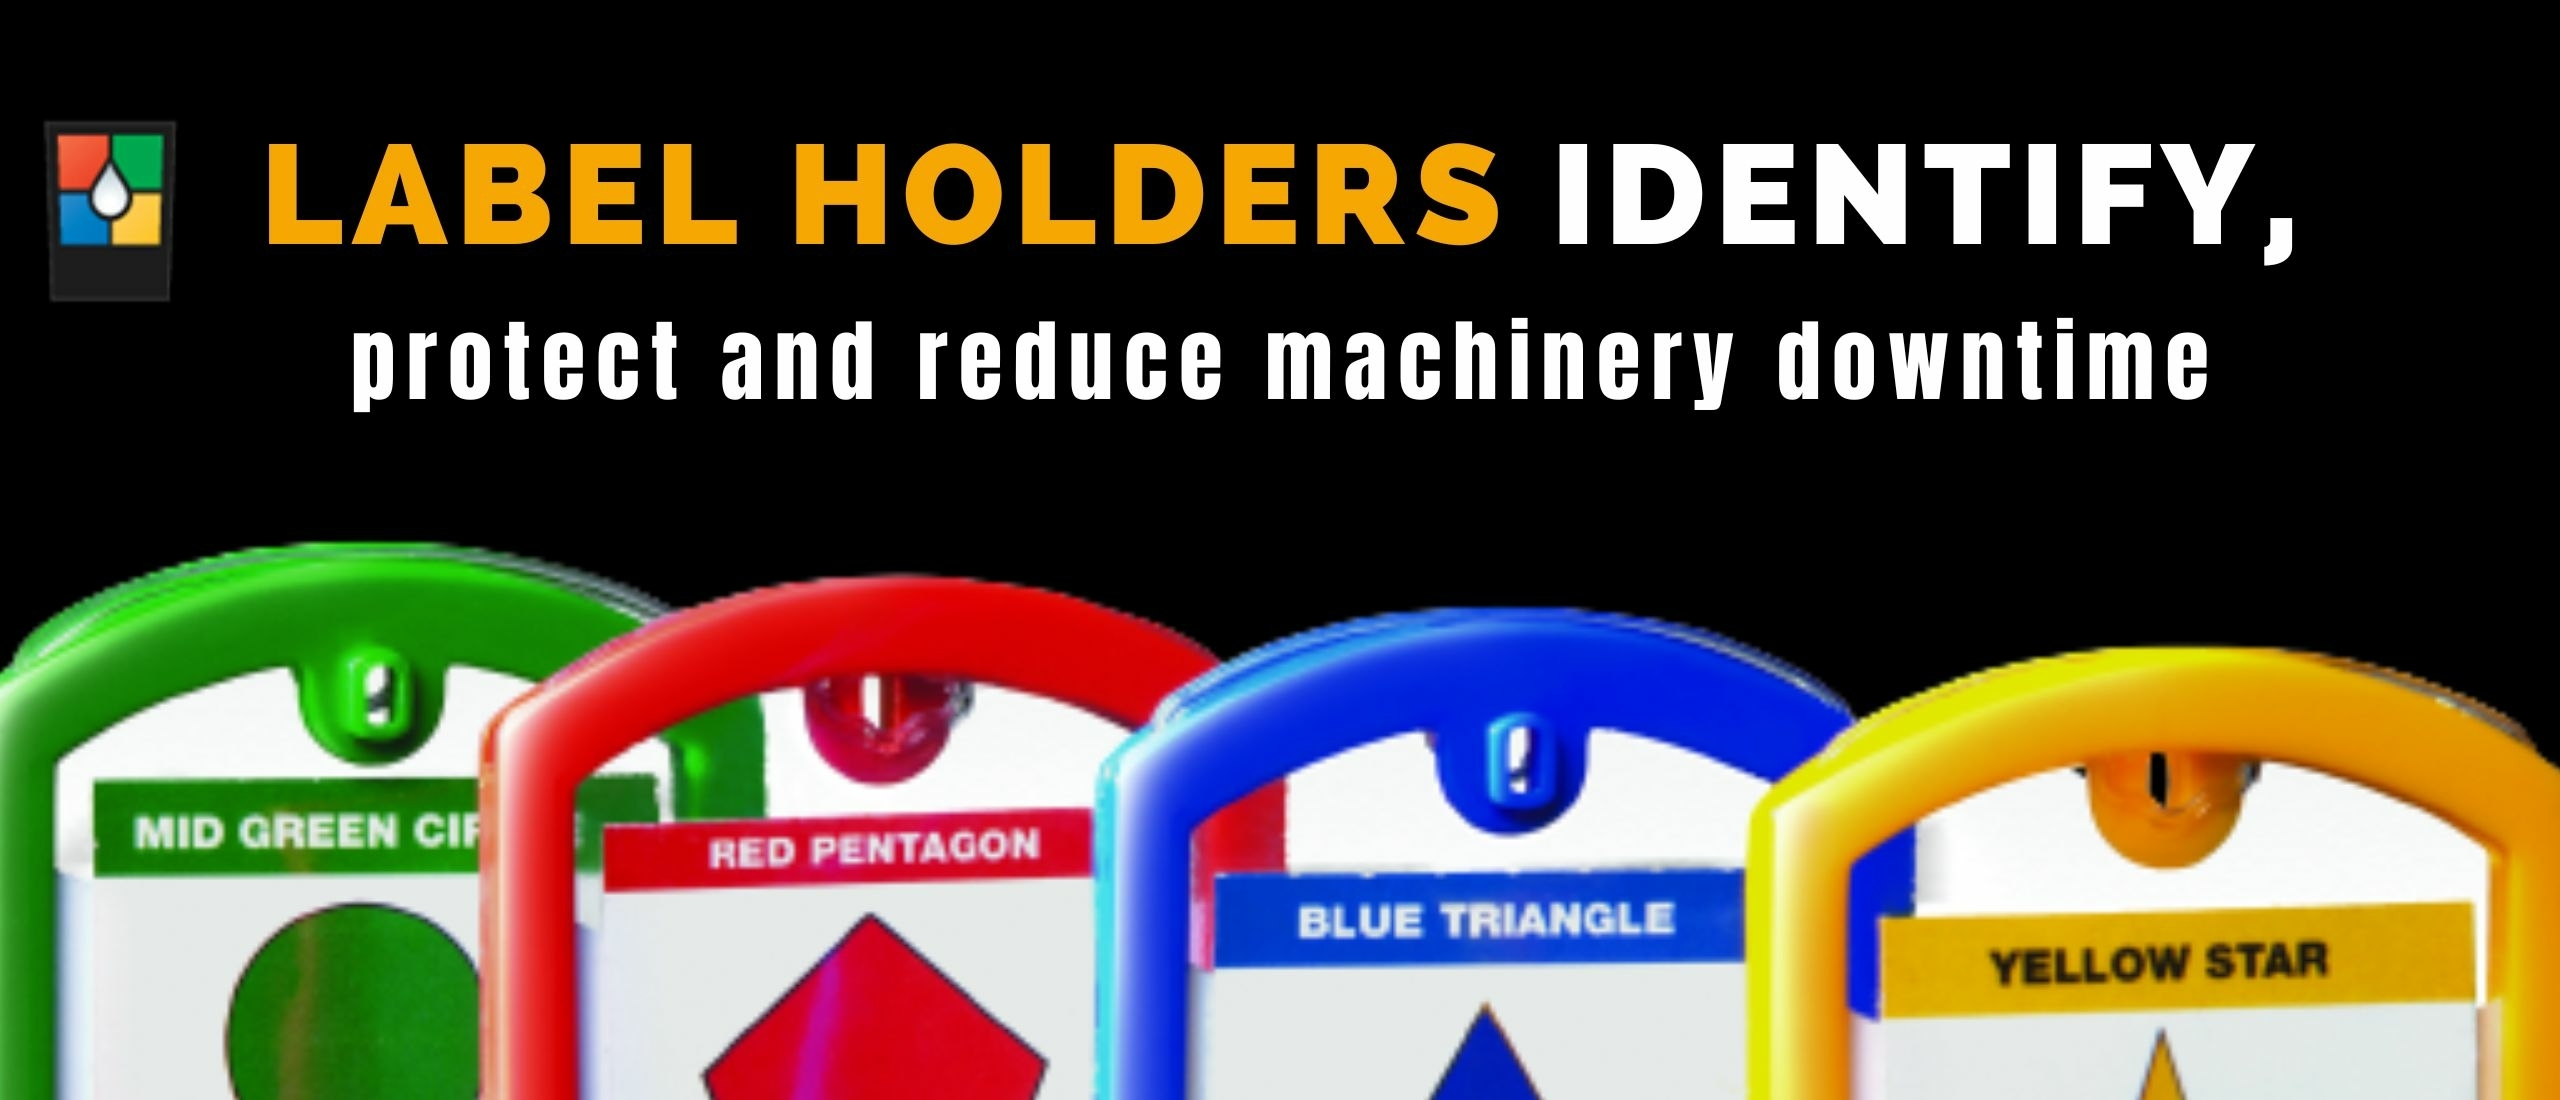 Label Holders identify, protect and reduce machinery downtime